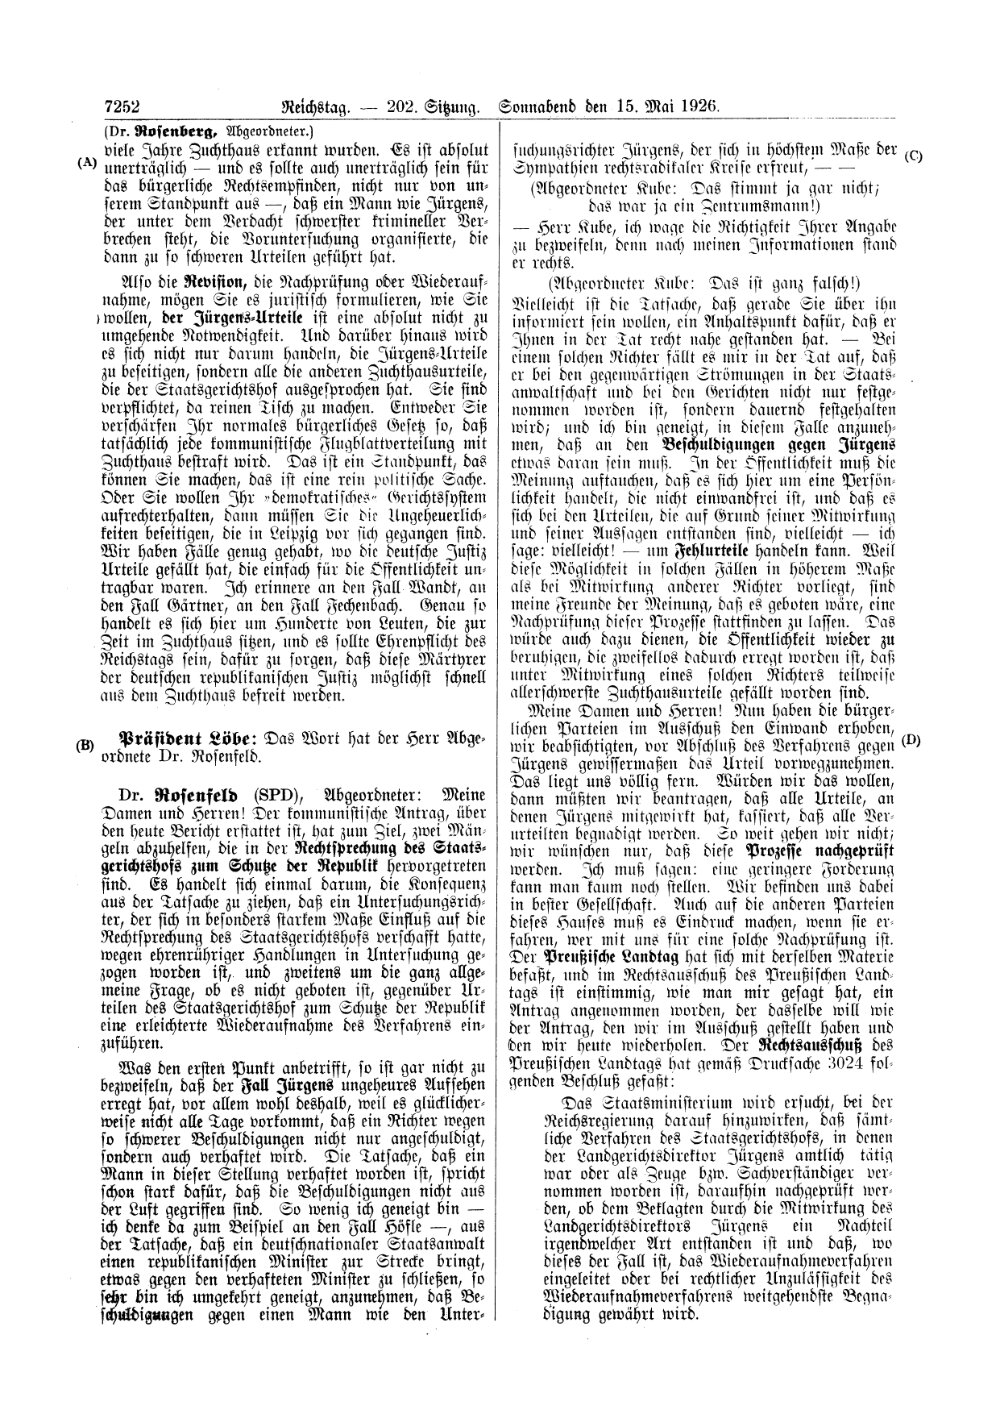 Scan of page 7252